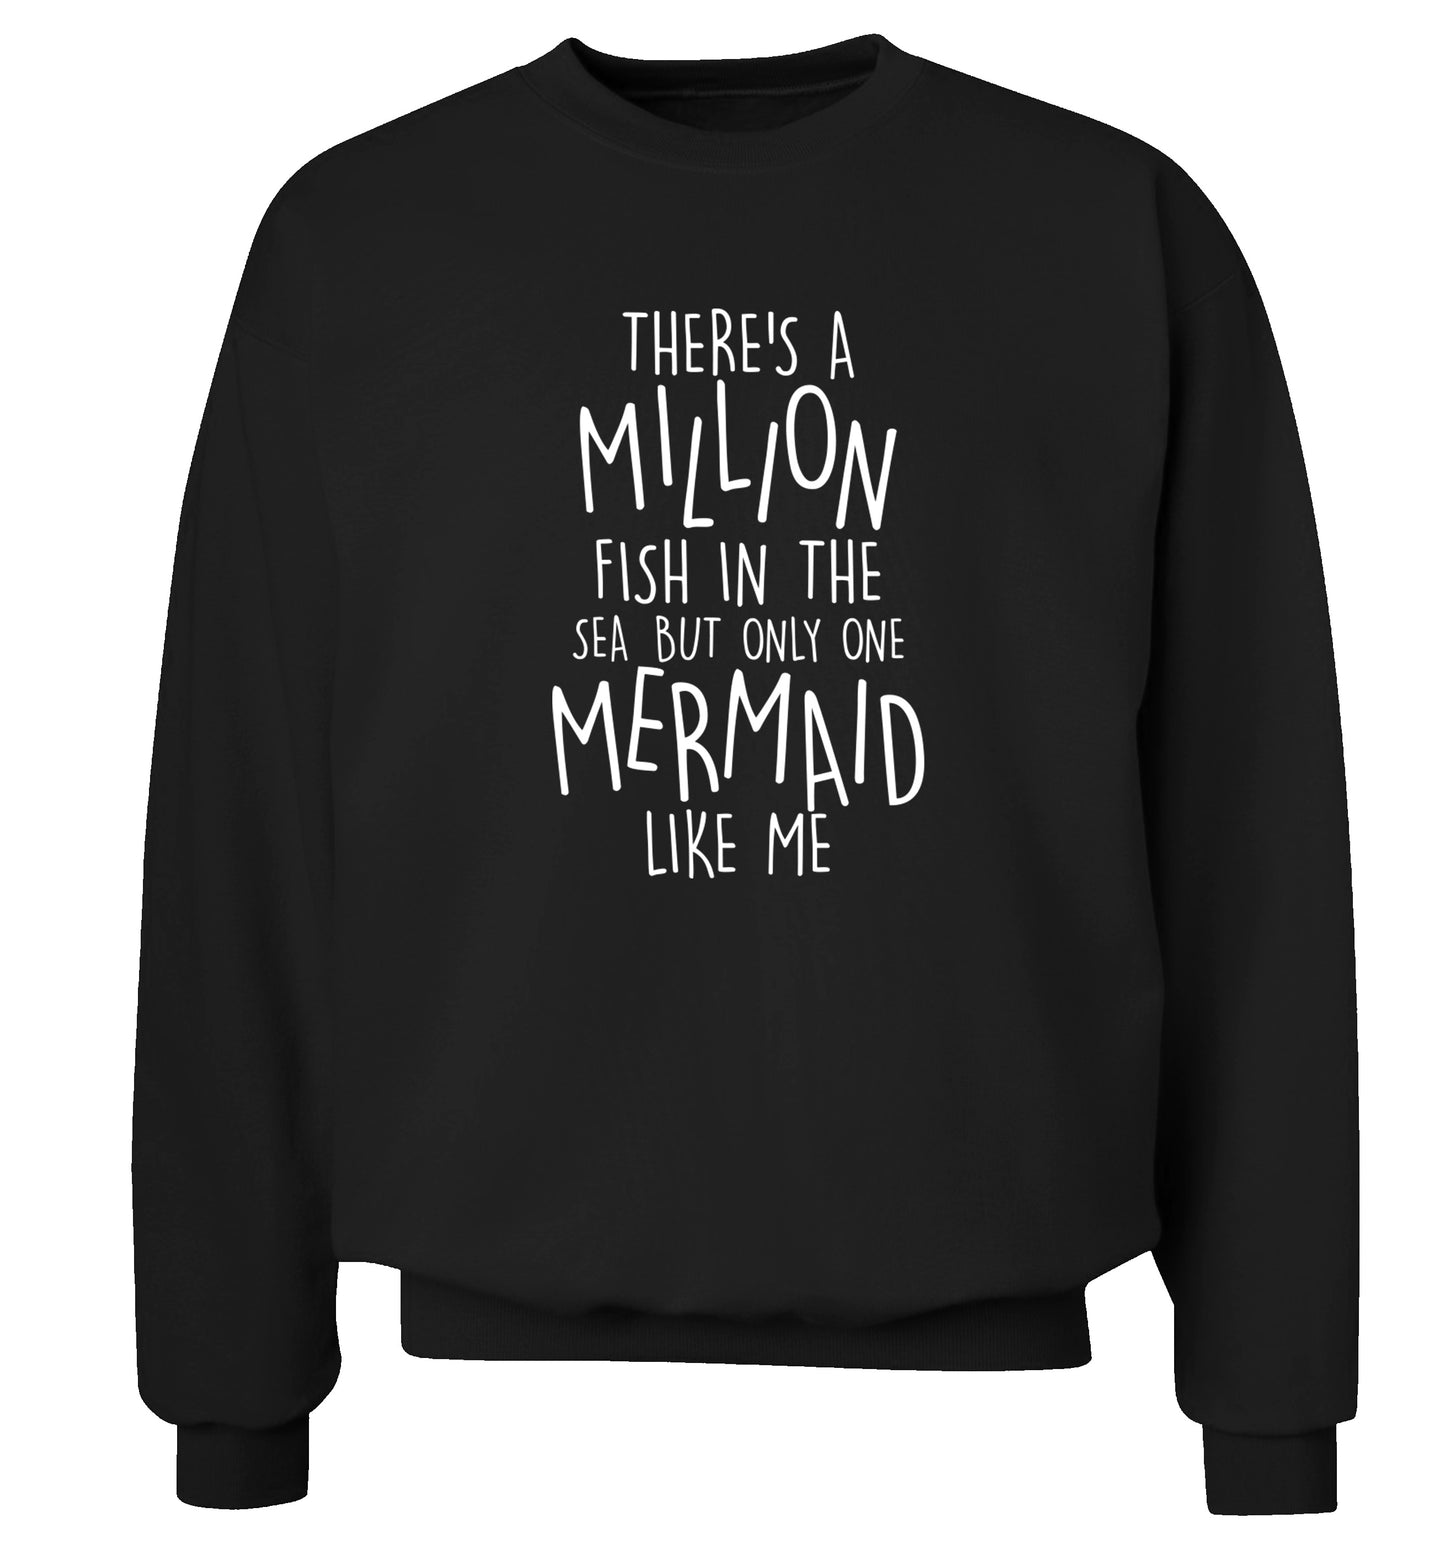 There's a million fish in the sea but only one mermaid like me Adult's unisex black Sweater 2XL